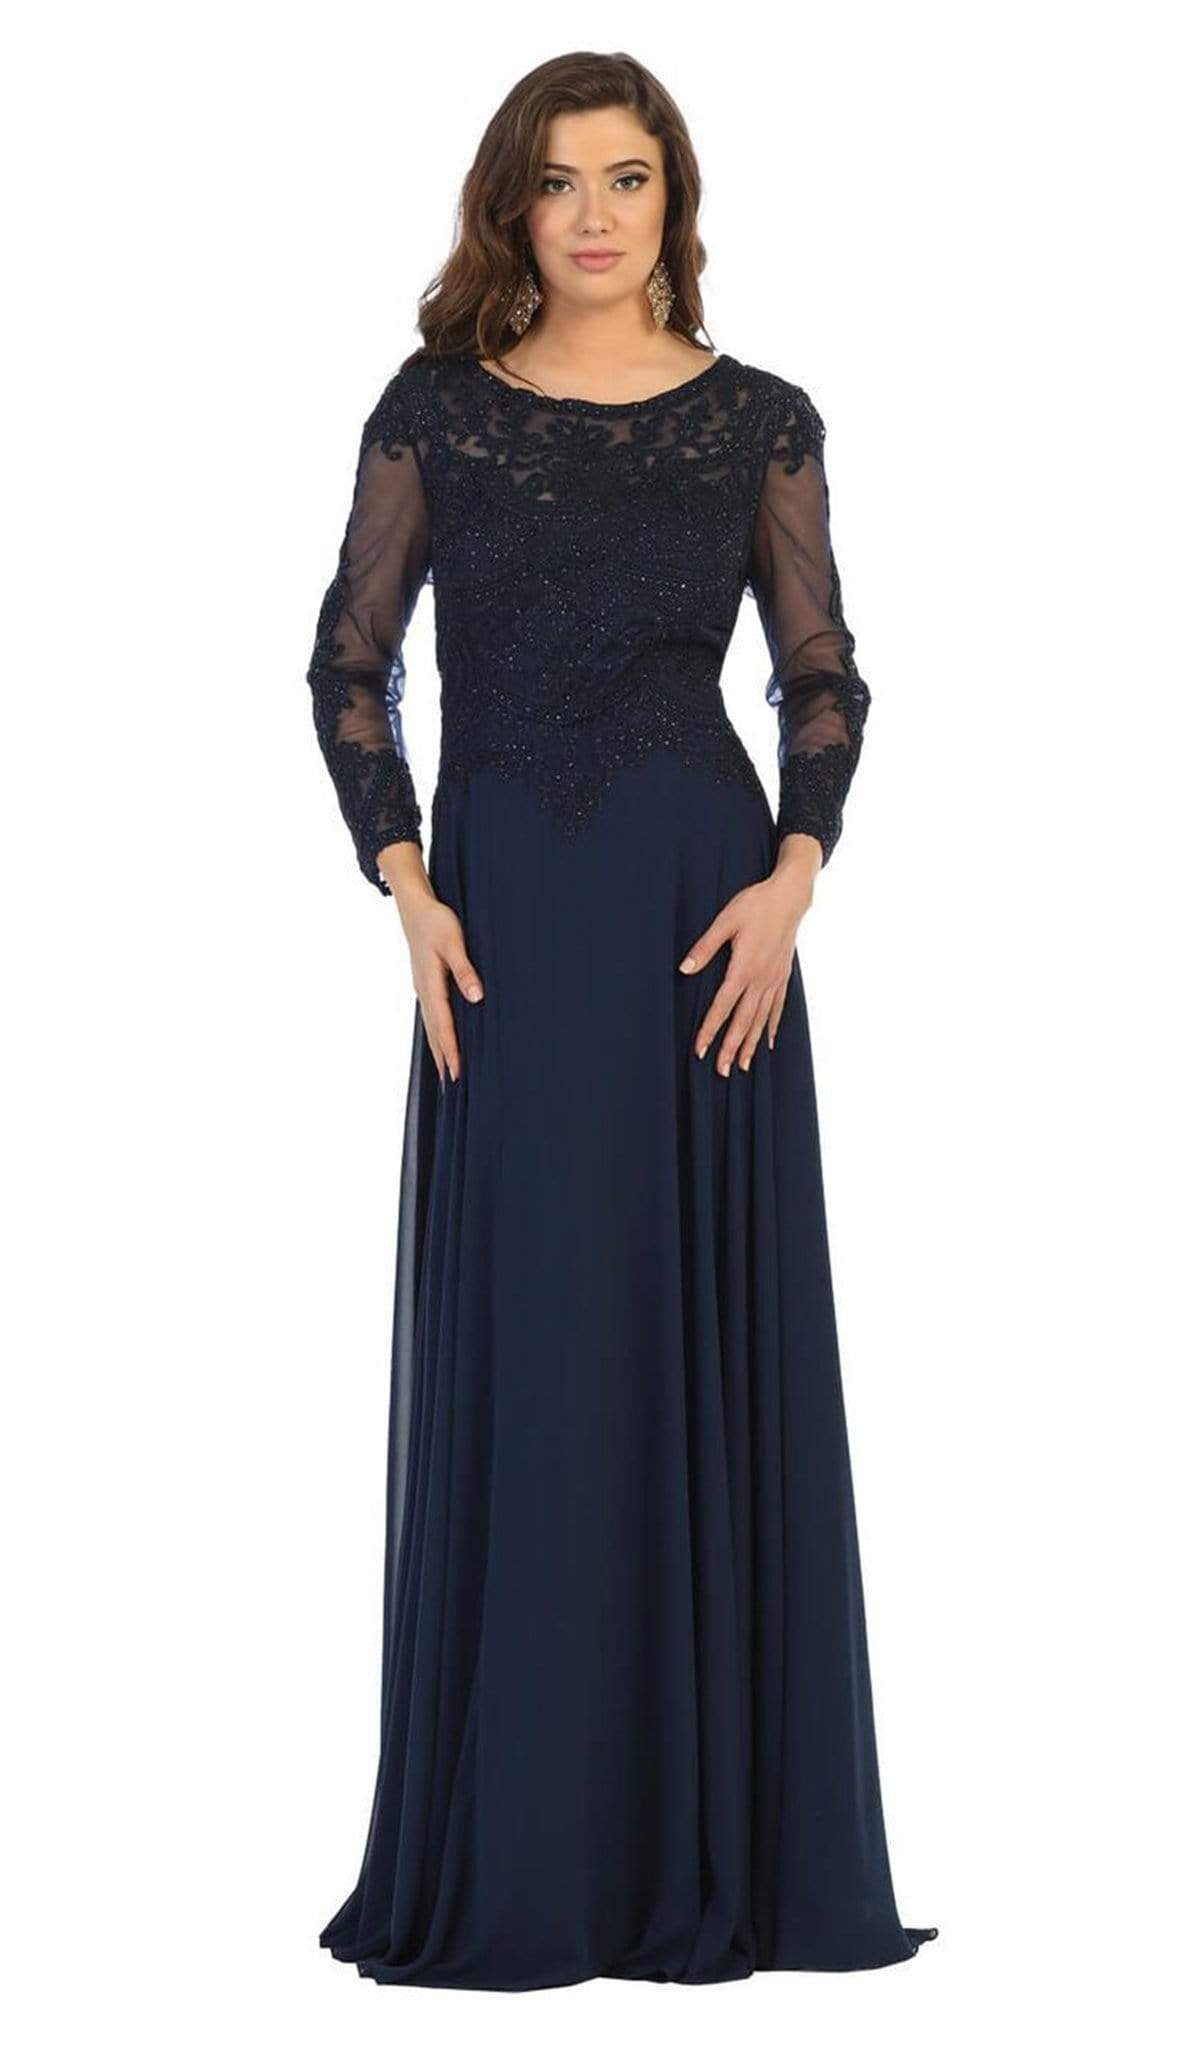 May Queen - MQ1615B Applique Long Sleeve A-line Dress In Blue